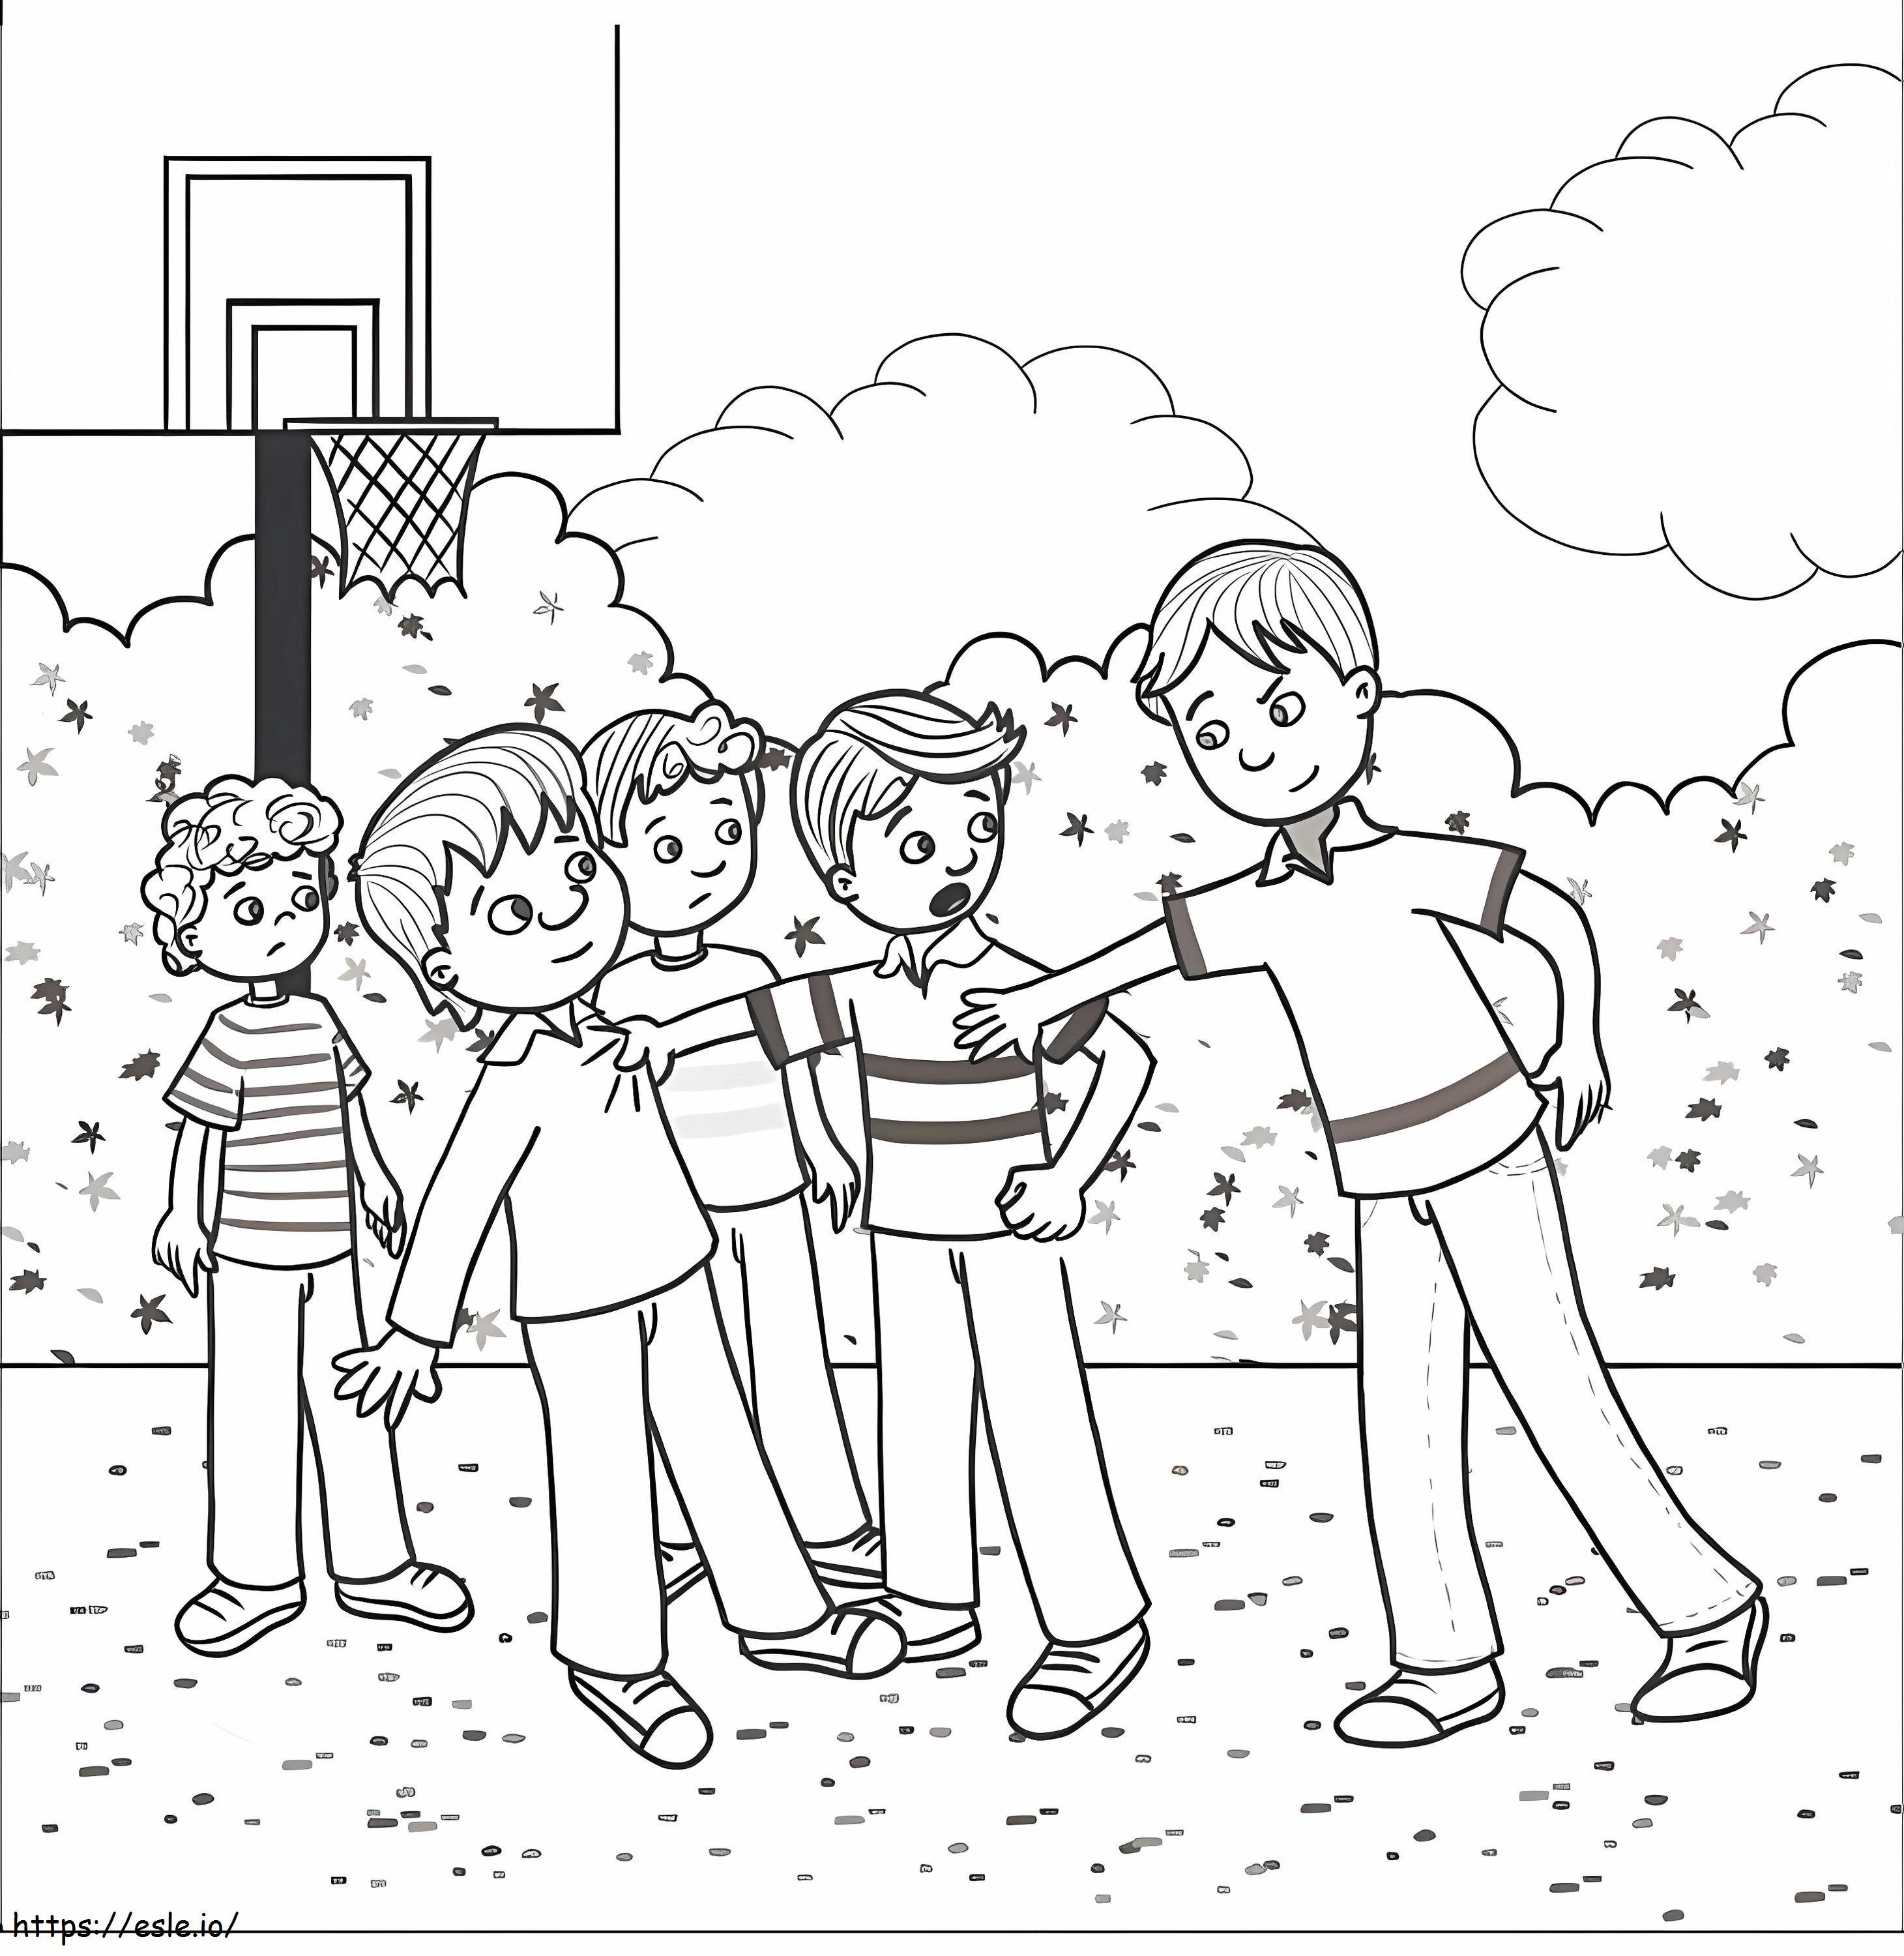 Show Courage coloring page